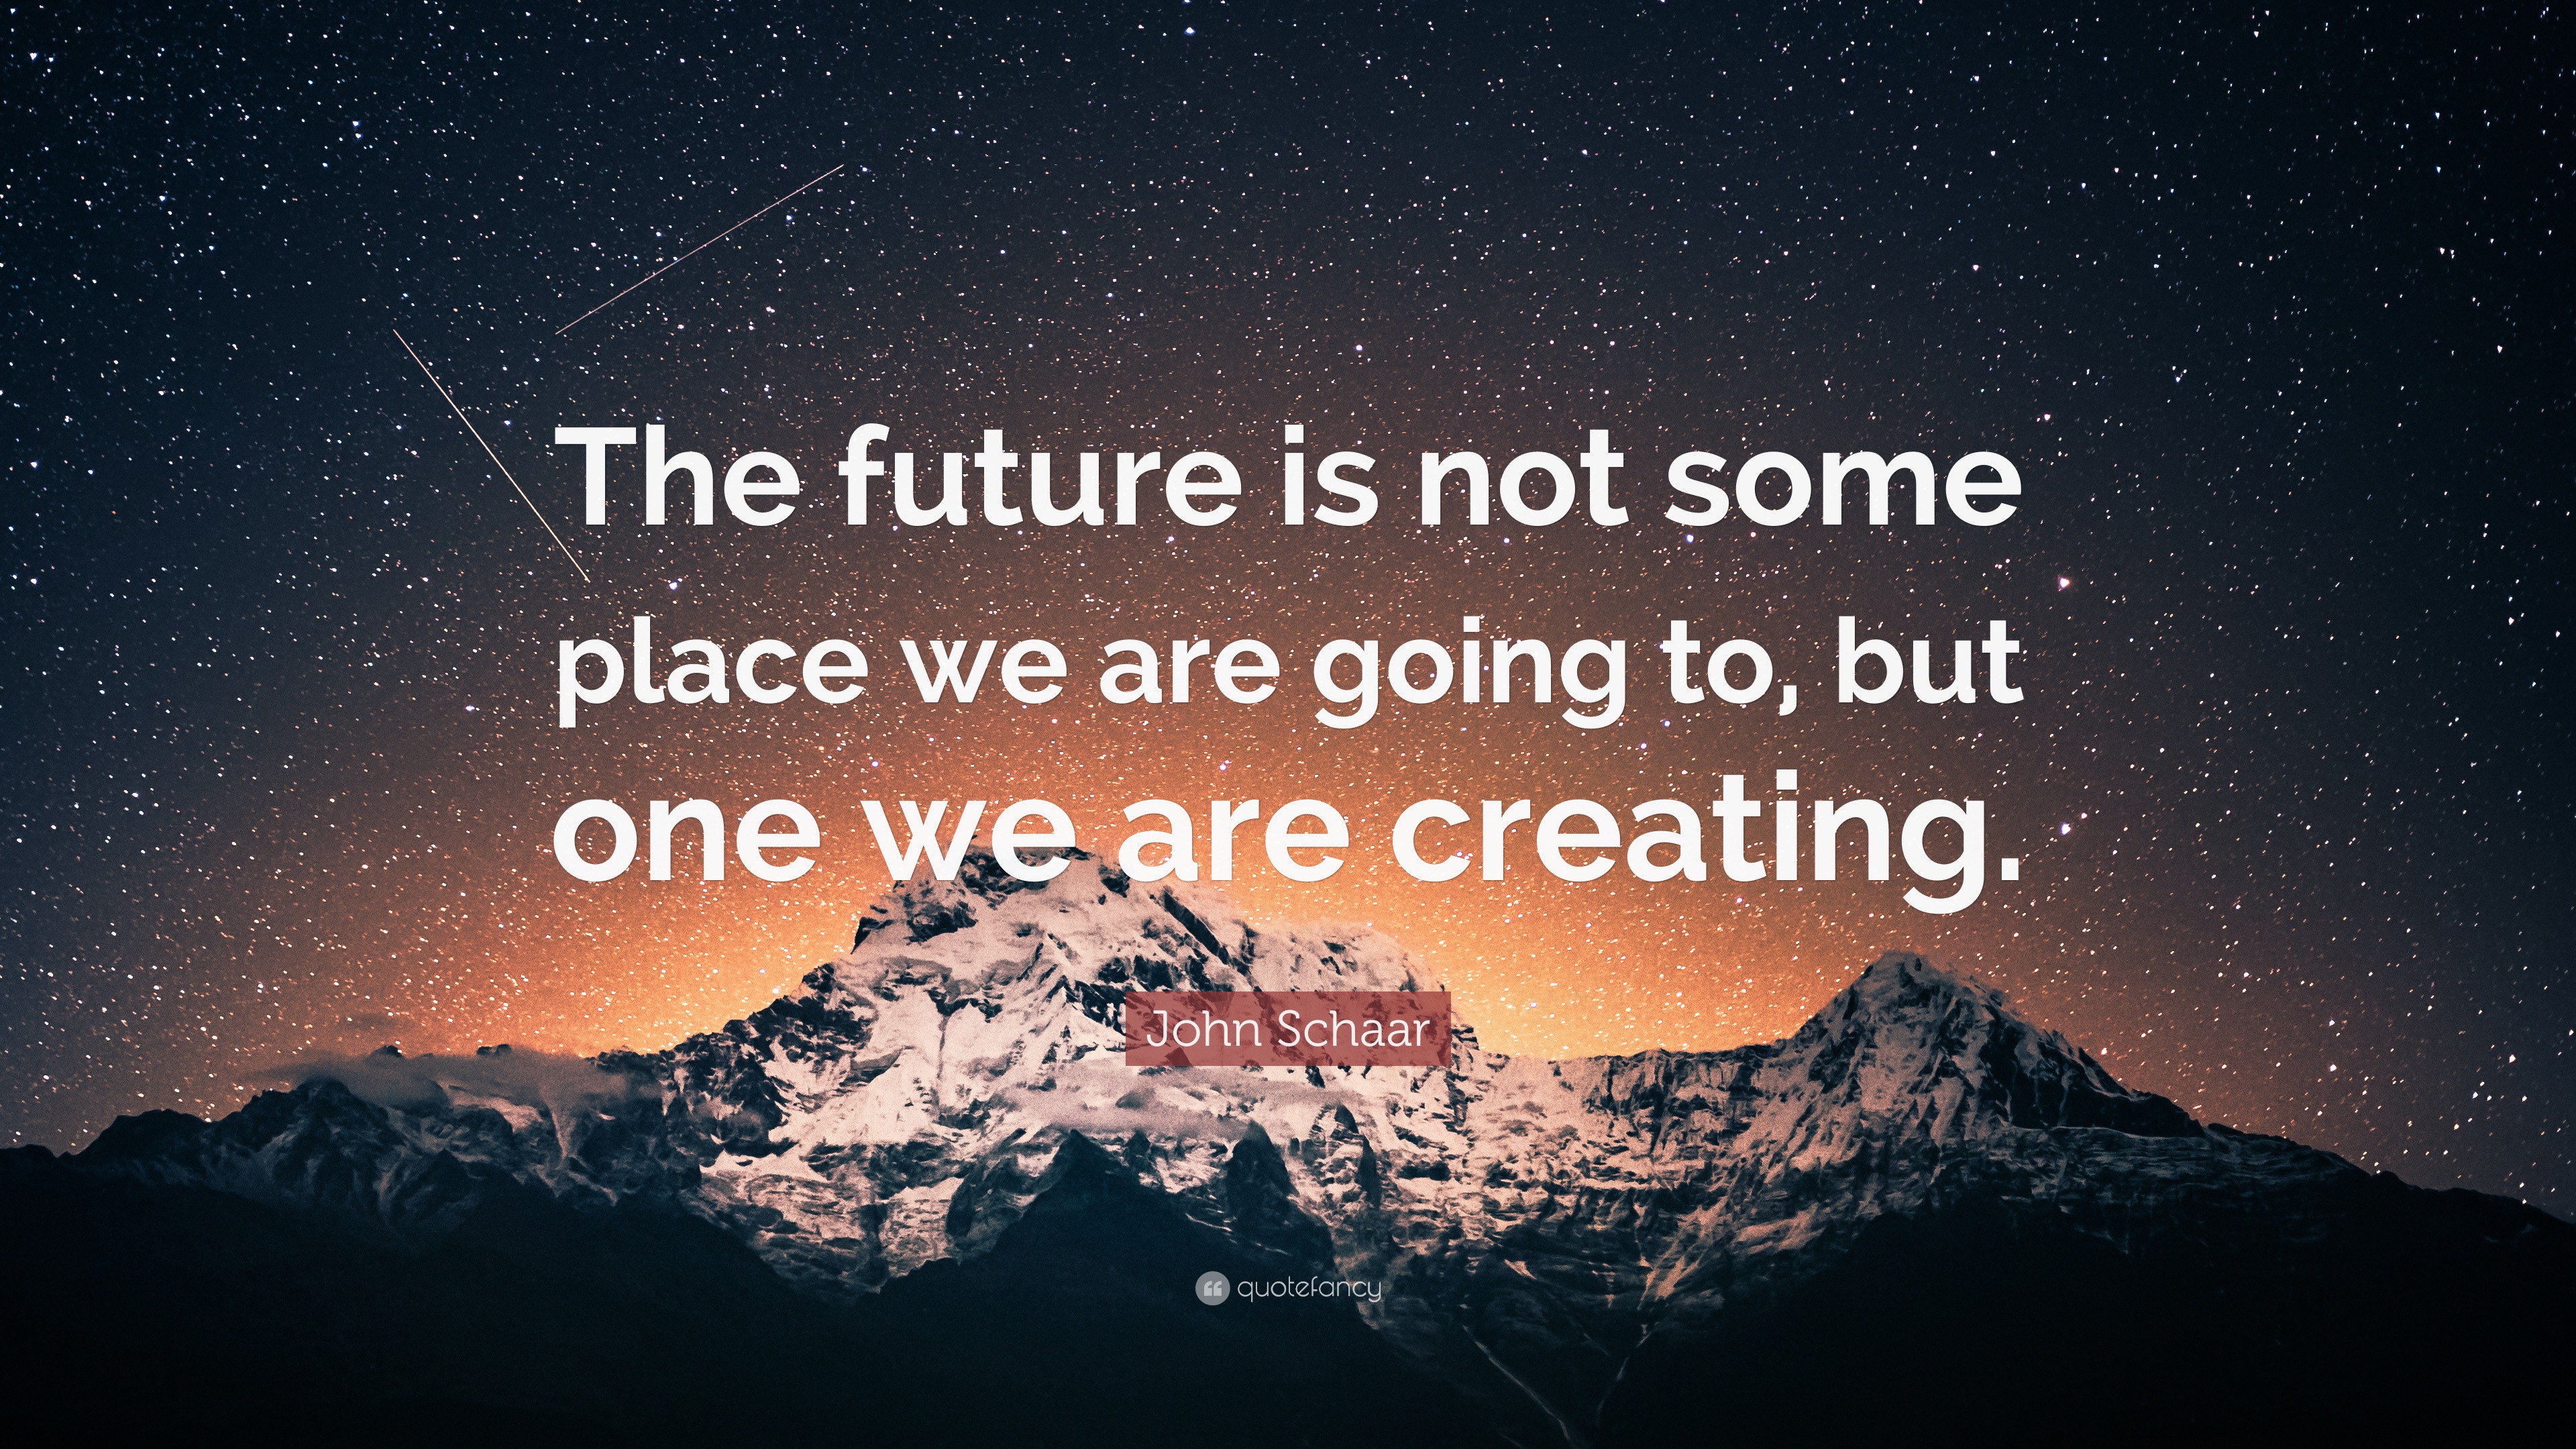 John Schaar Quote: “The future is not some place we are going to, but